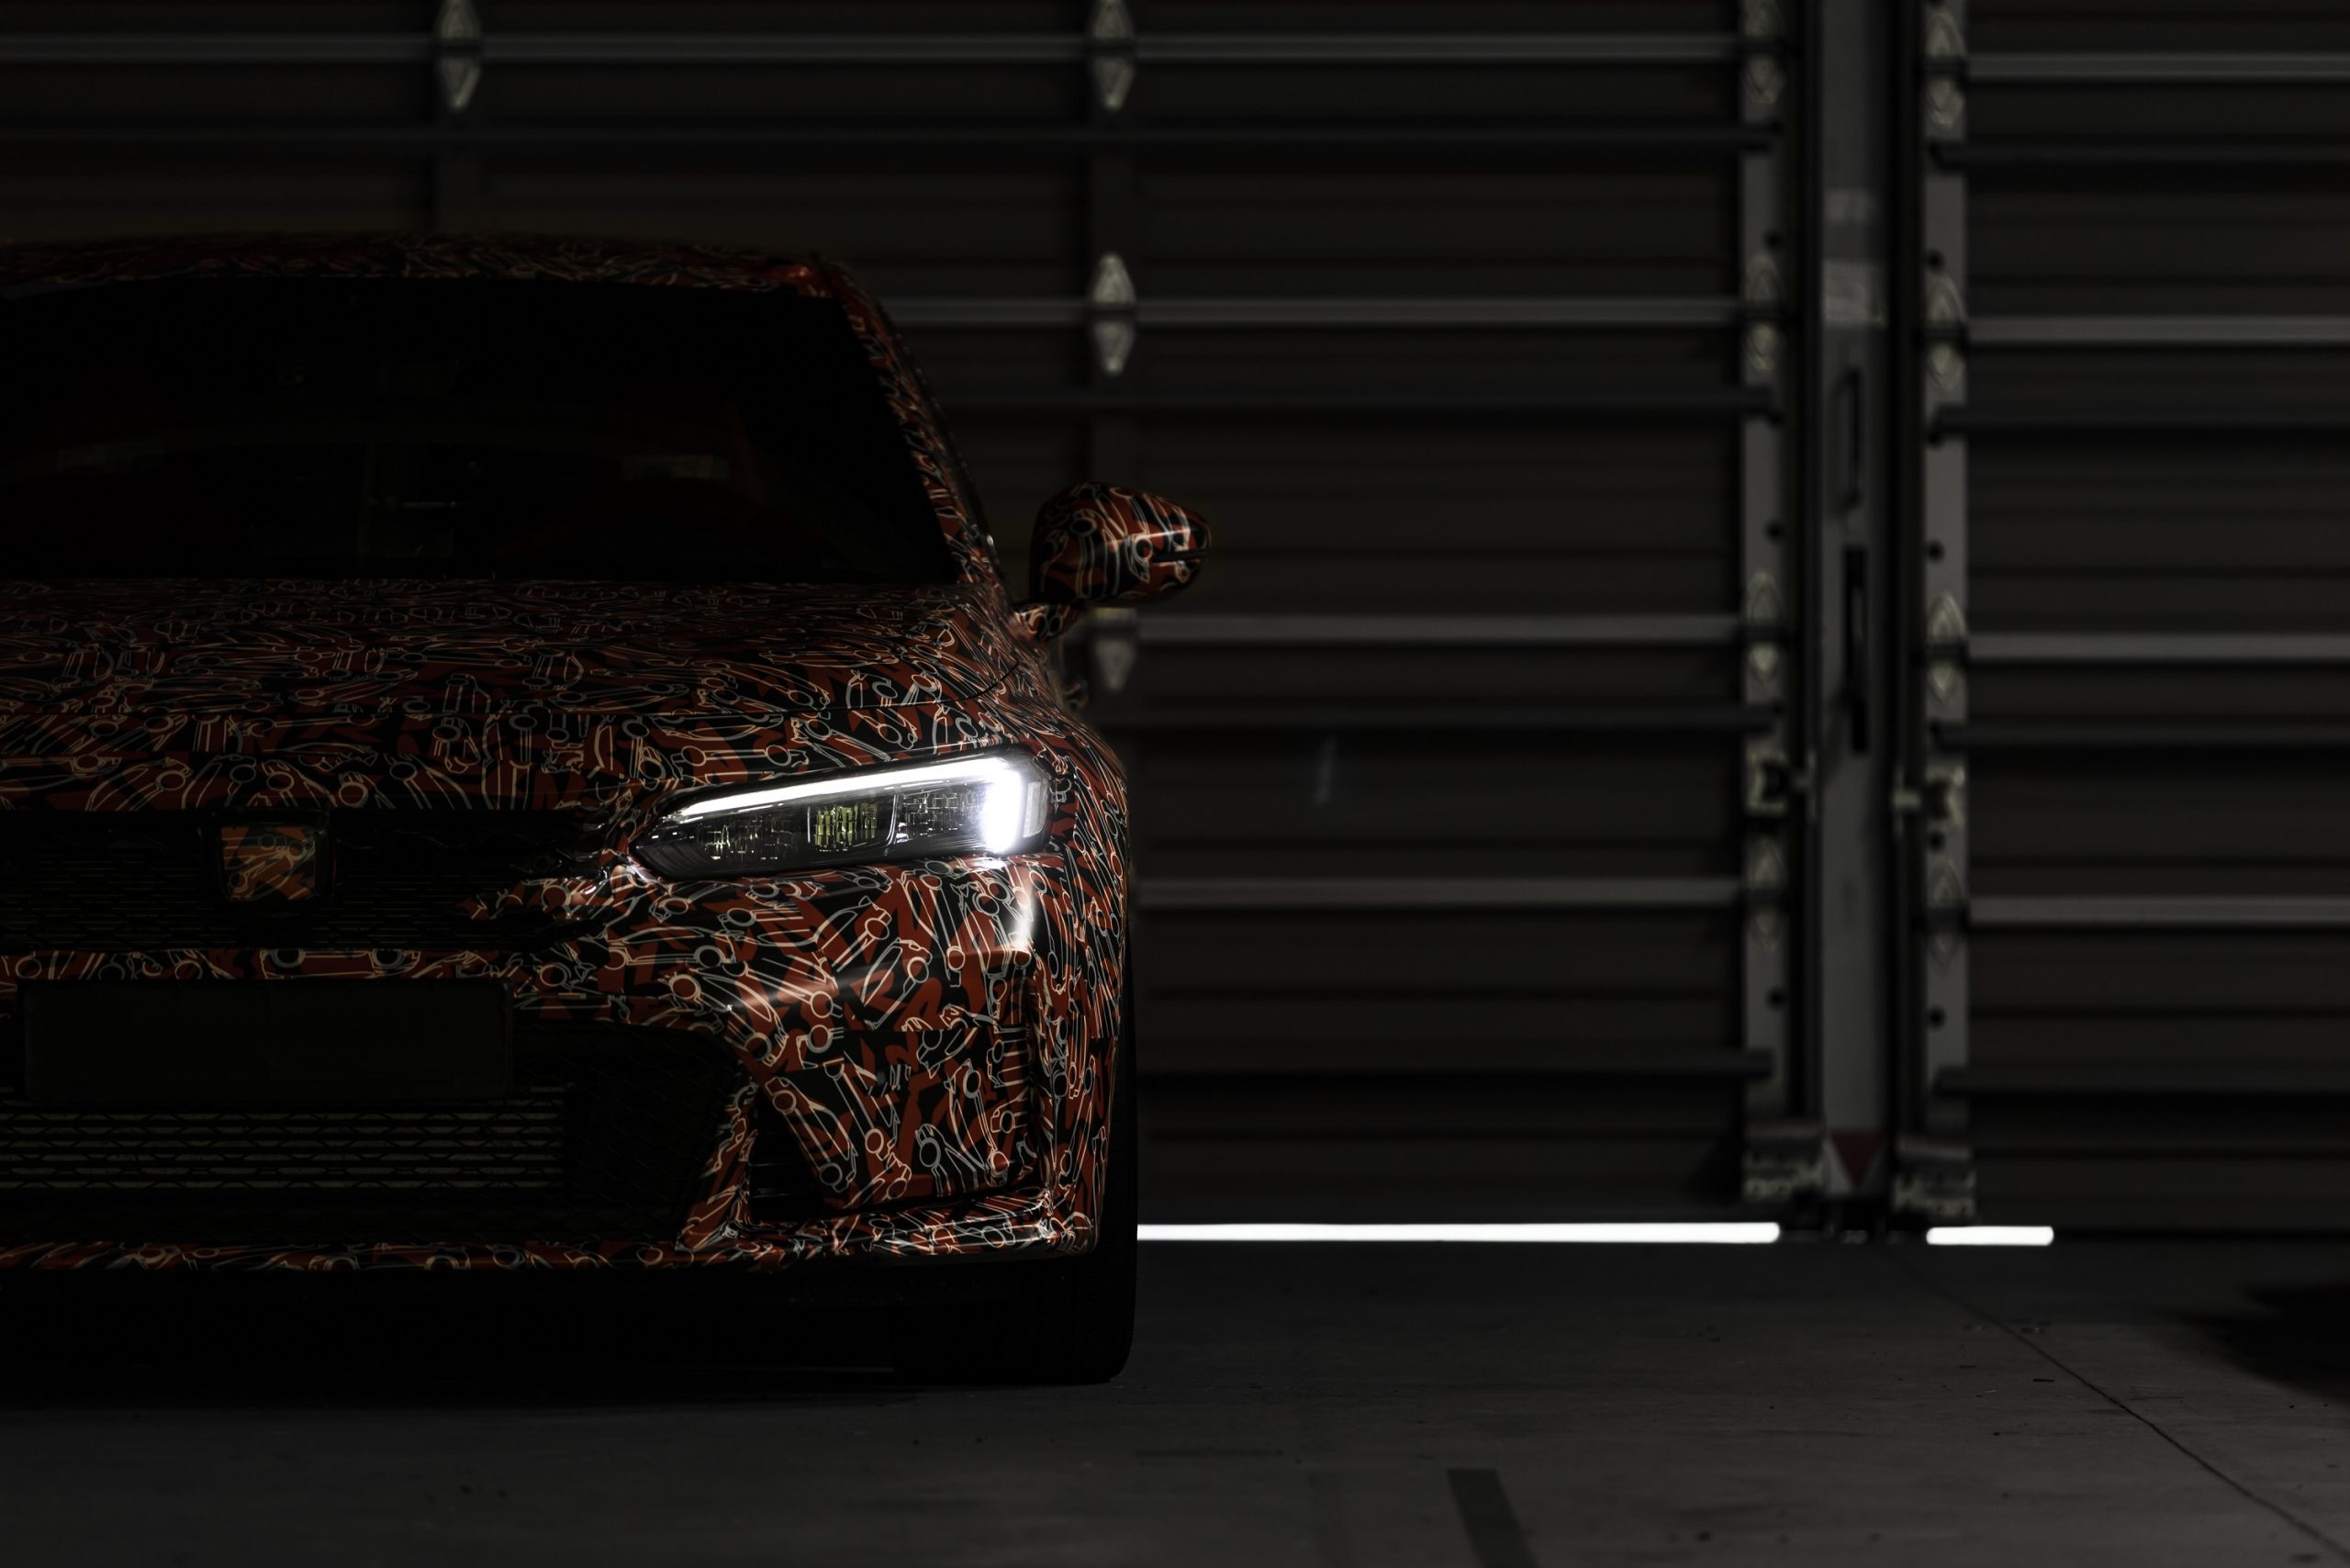 The new Honda Civic Type R in a camo livery shot from the front